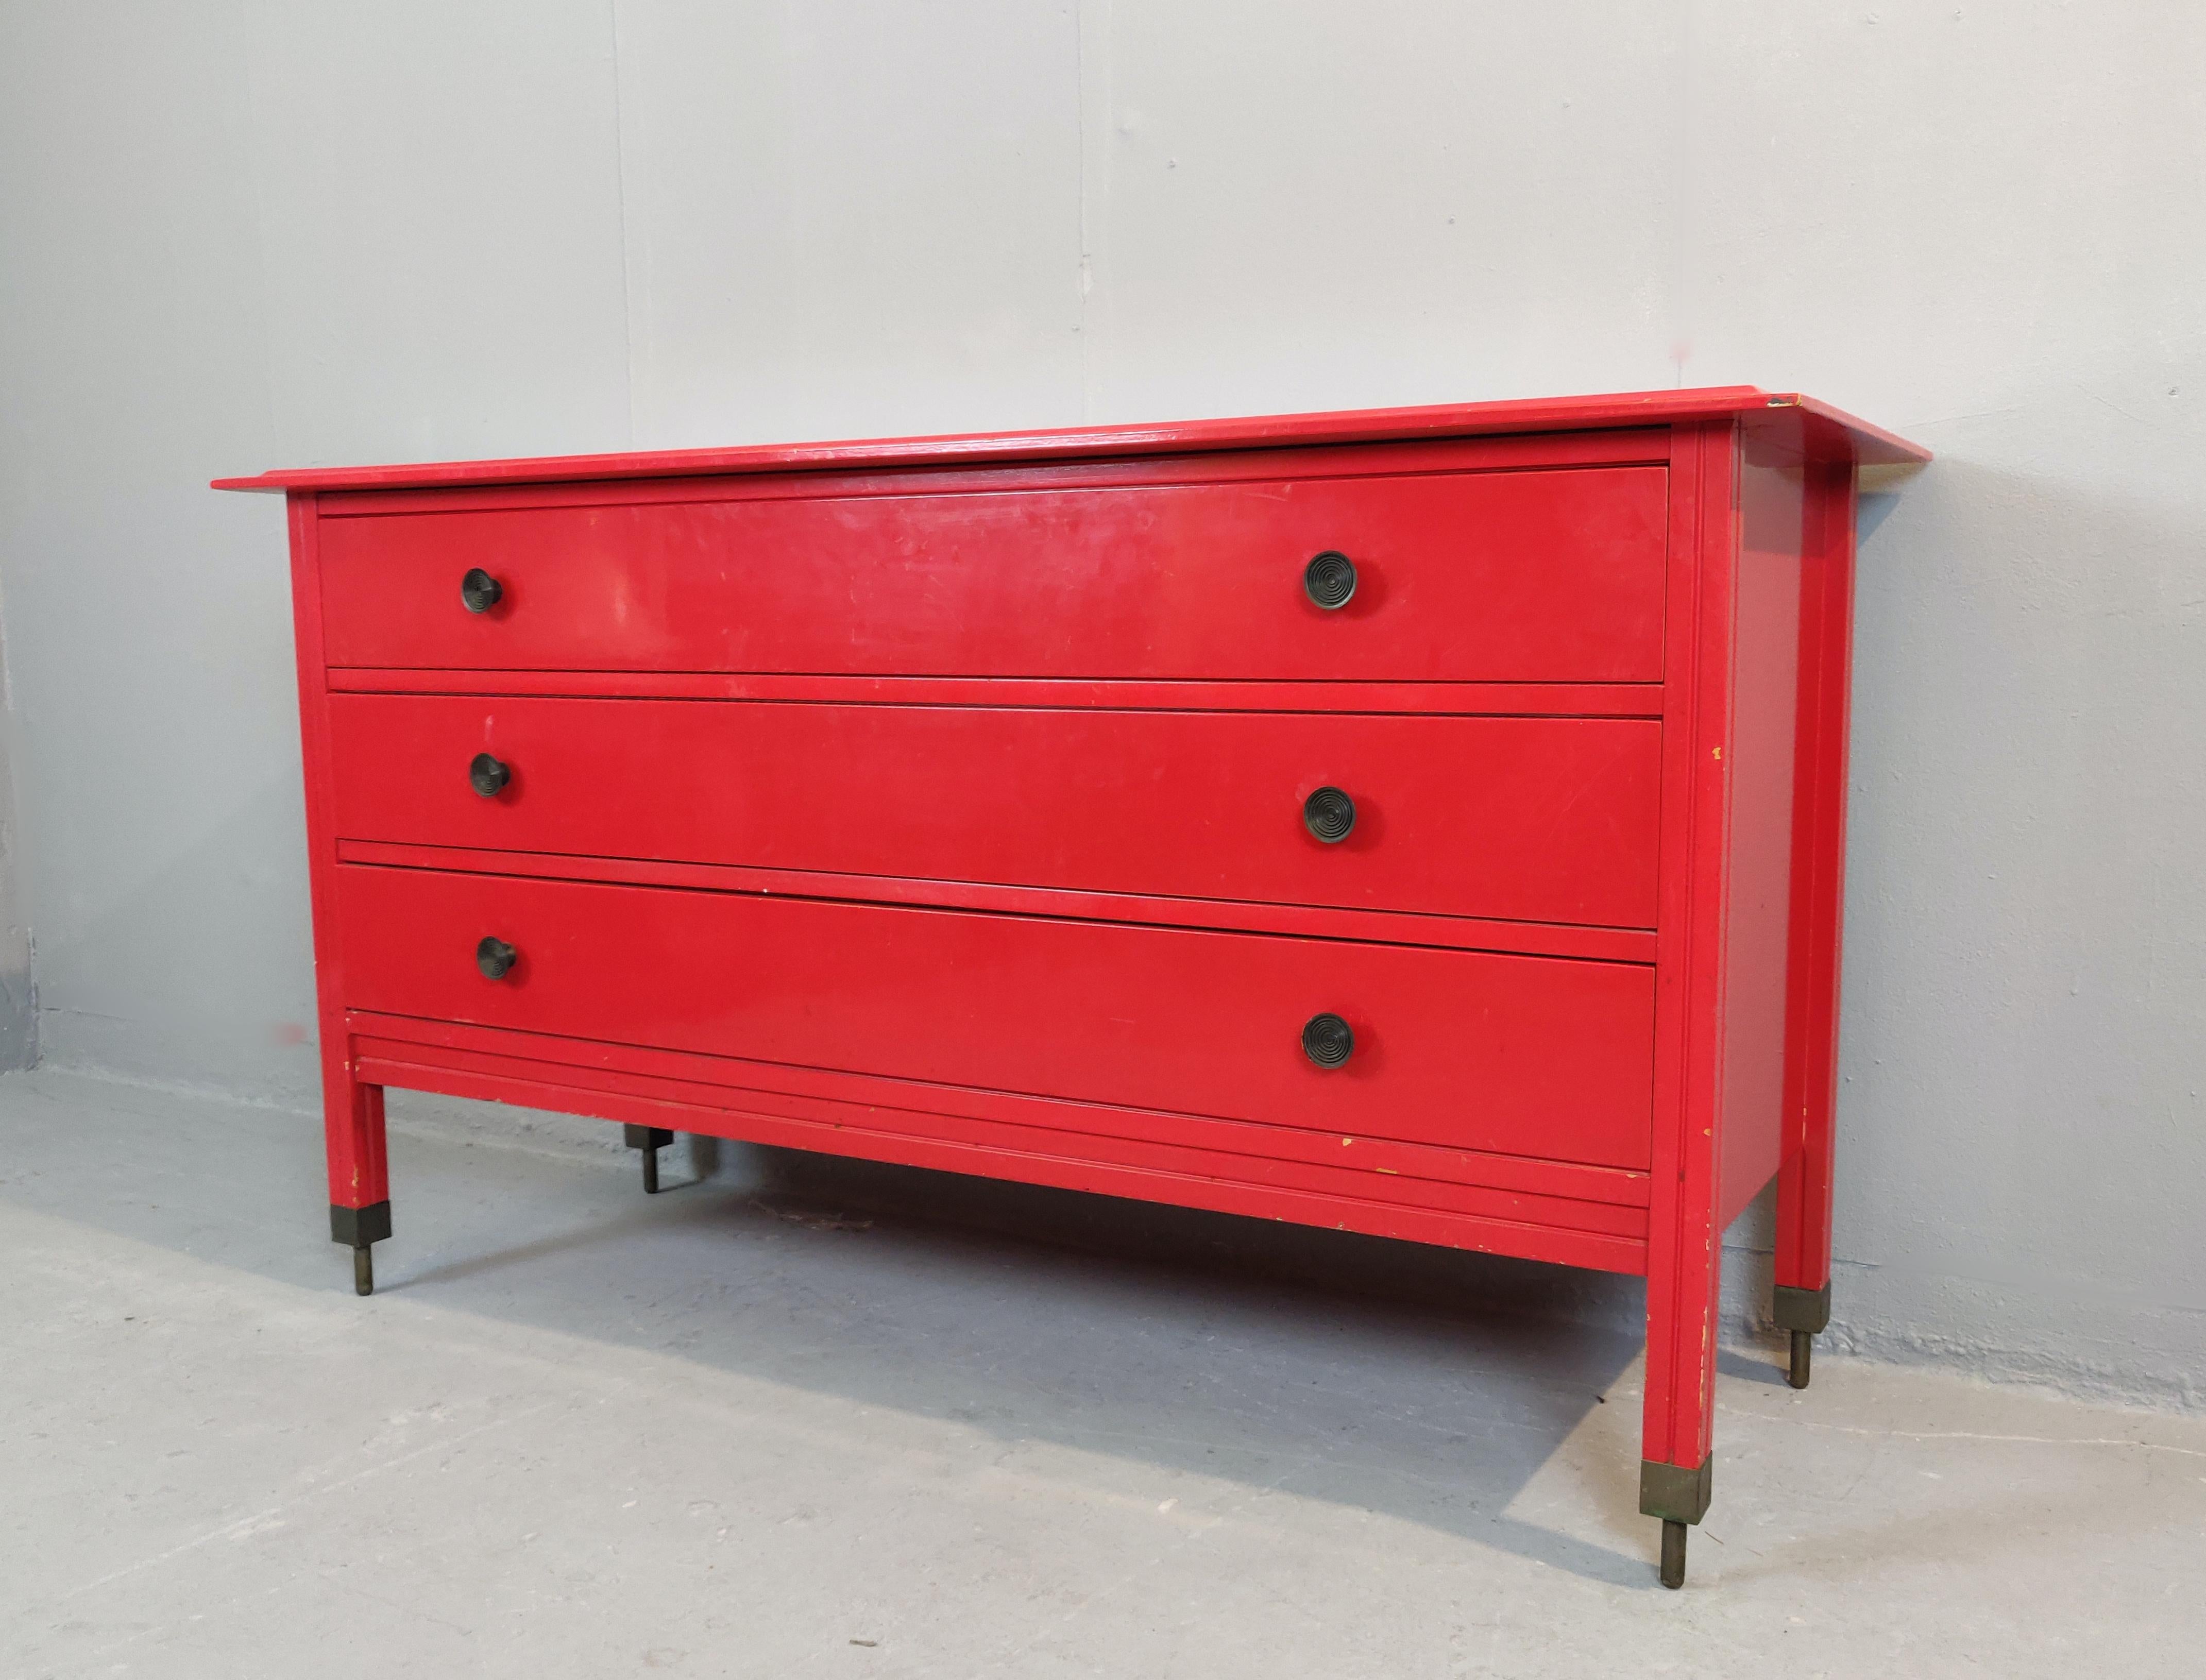 Red chest of drawers by Carlo di Carli, Italy, circa 1960.